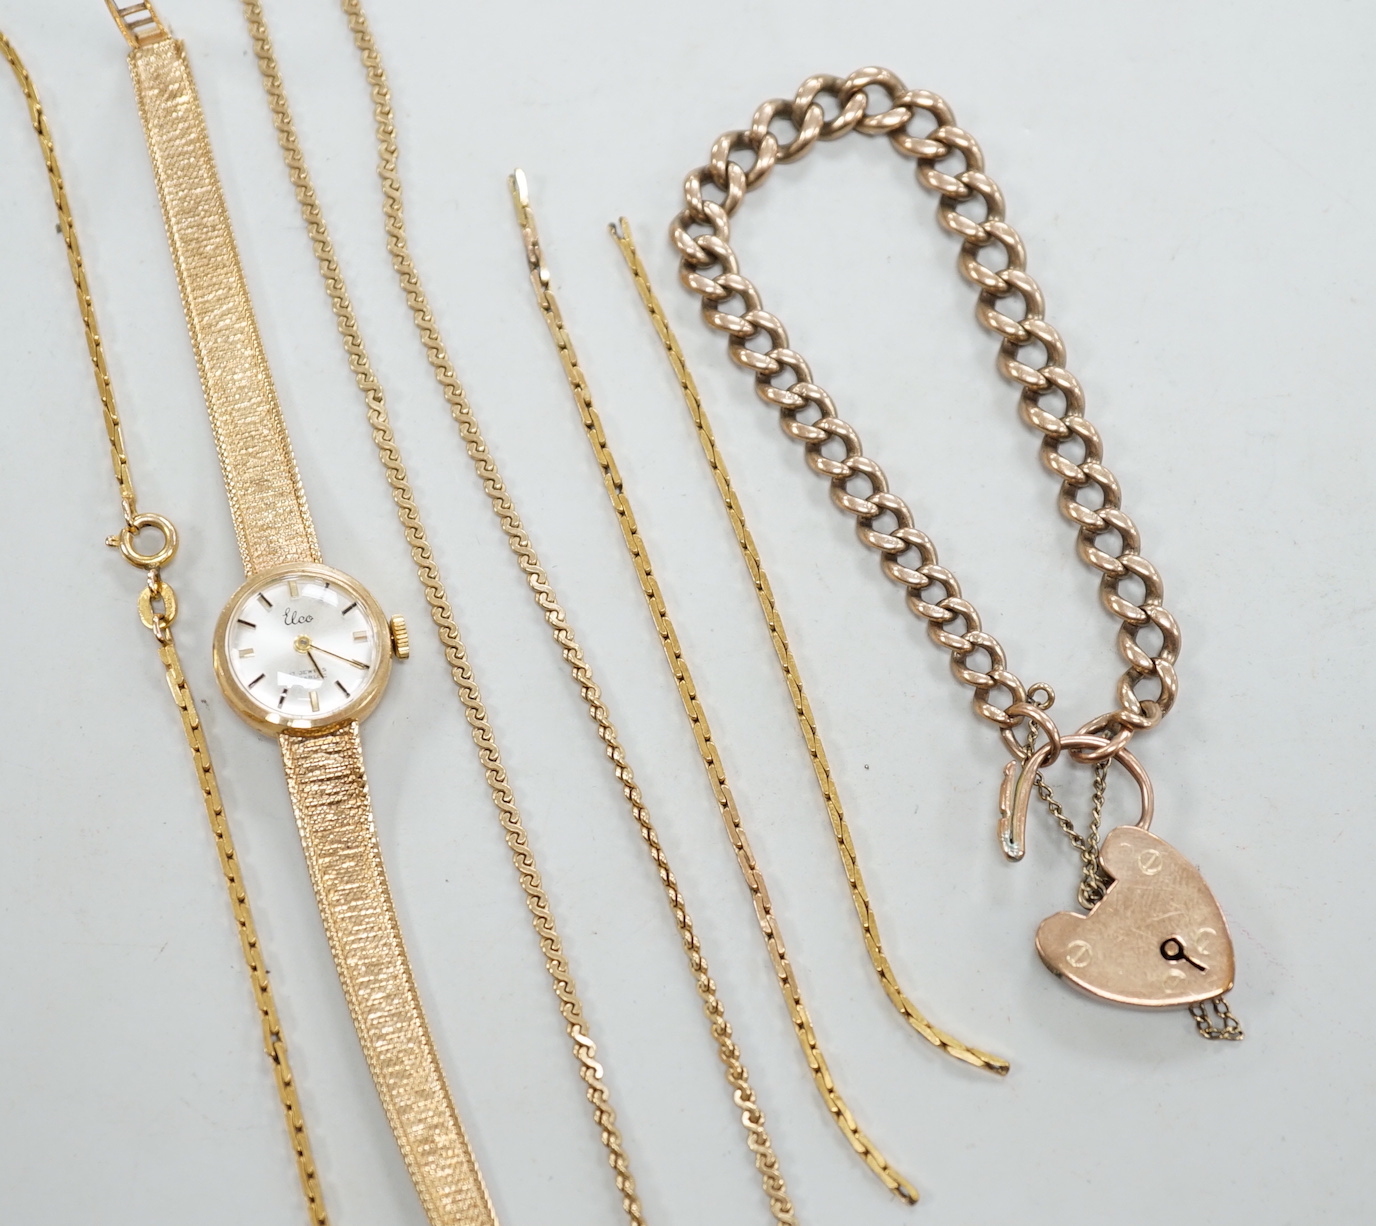 A 9c graduated curb link bracelet, a 9ct chain, a damaged 9k bracelet and a lady's 9ct gold wrist watch, gross weight 47.8 grams.